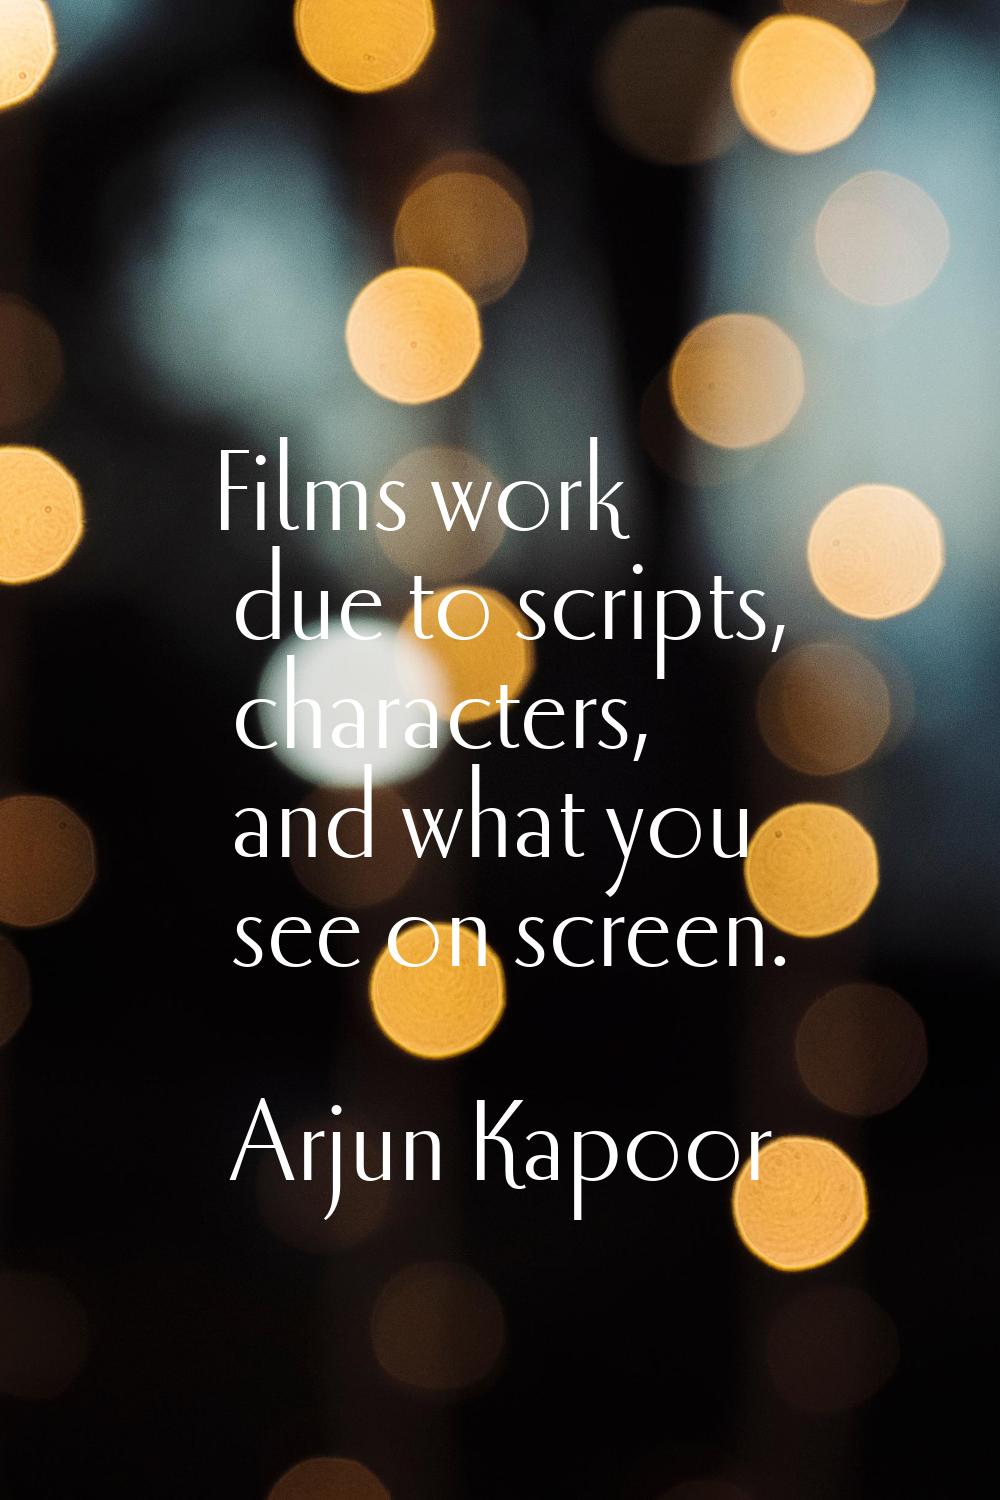 Films work due to scripts, characters, and what you see on screen.